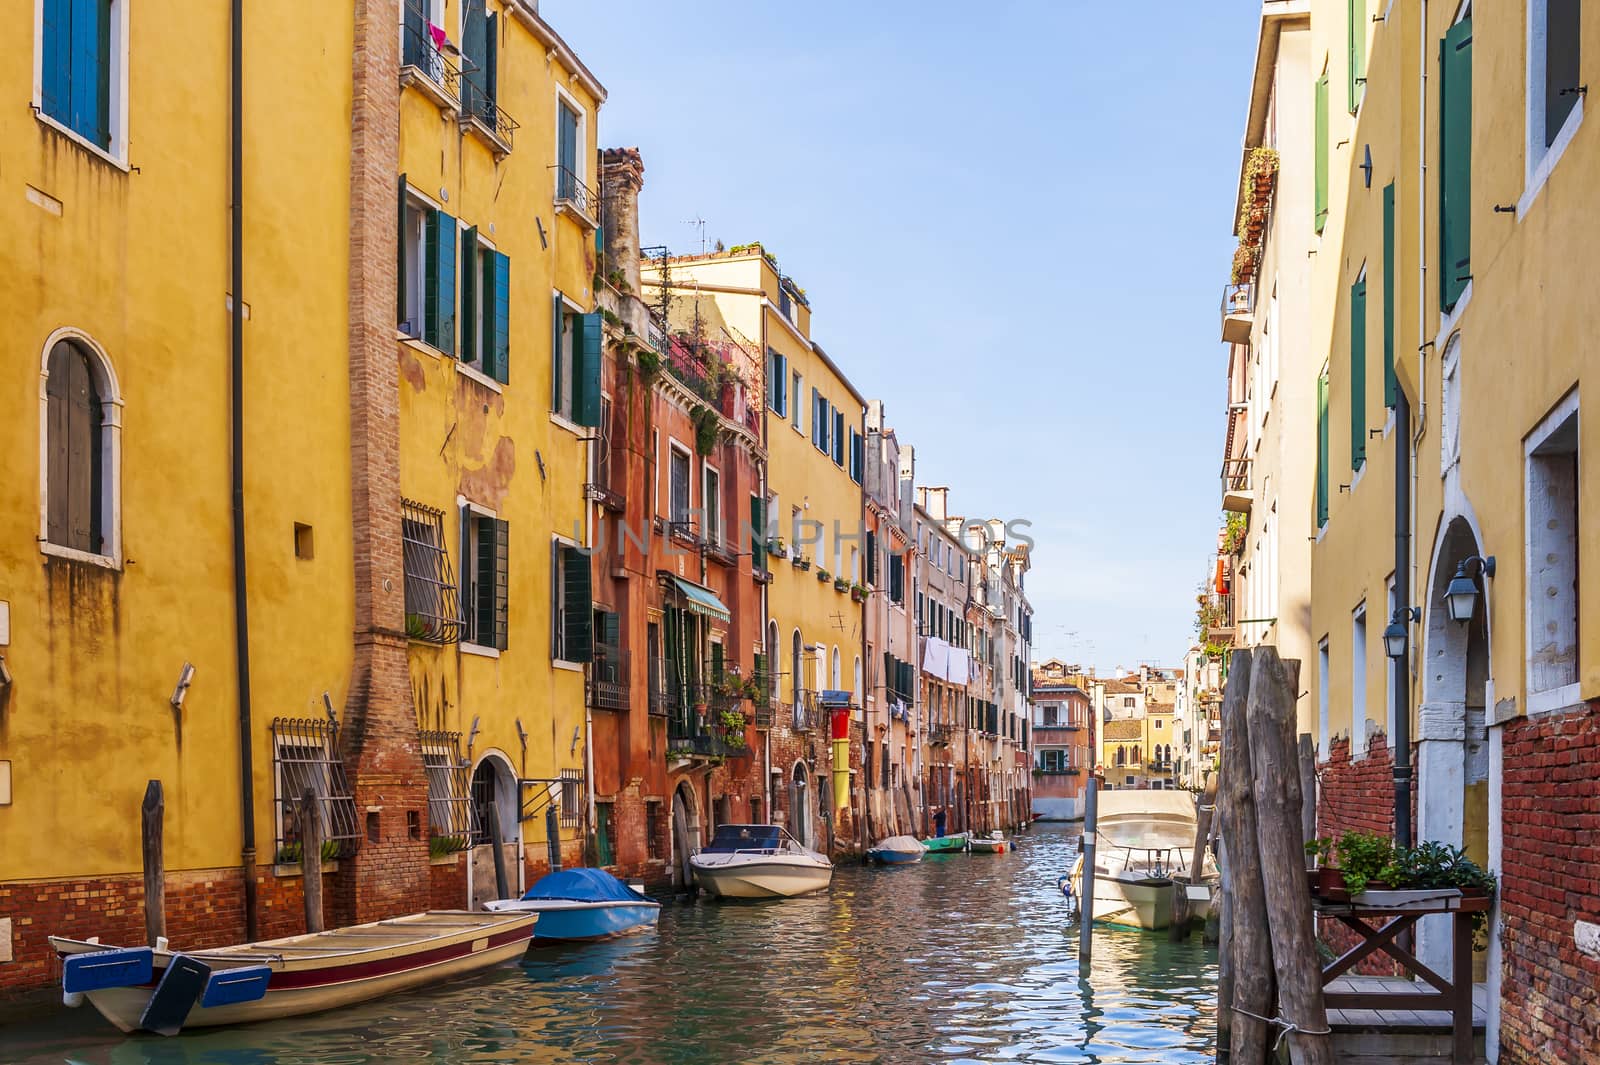 Canal and its colorful facades and boats in Venice in Veneto, Italy by Frederic